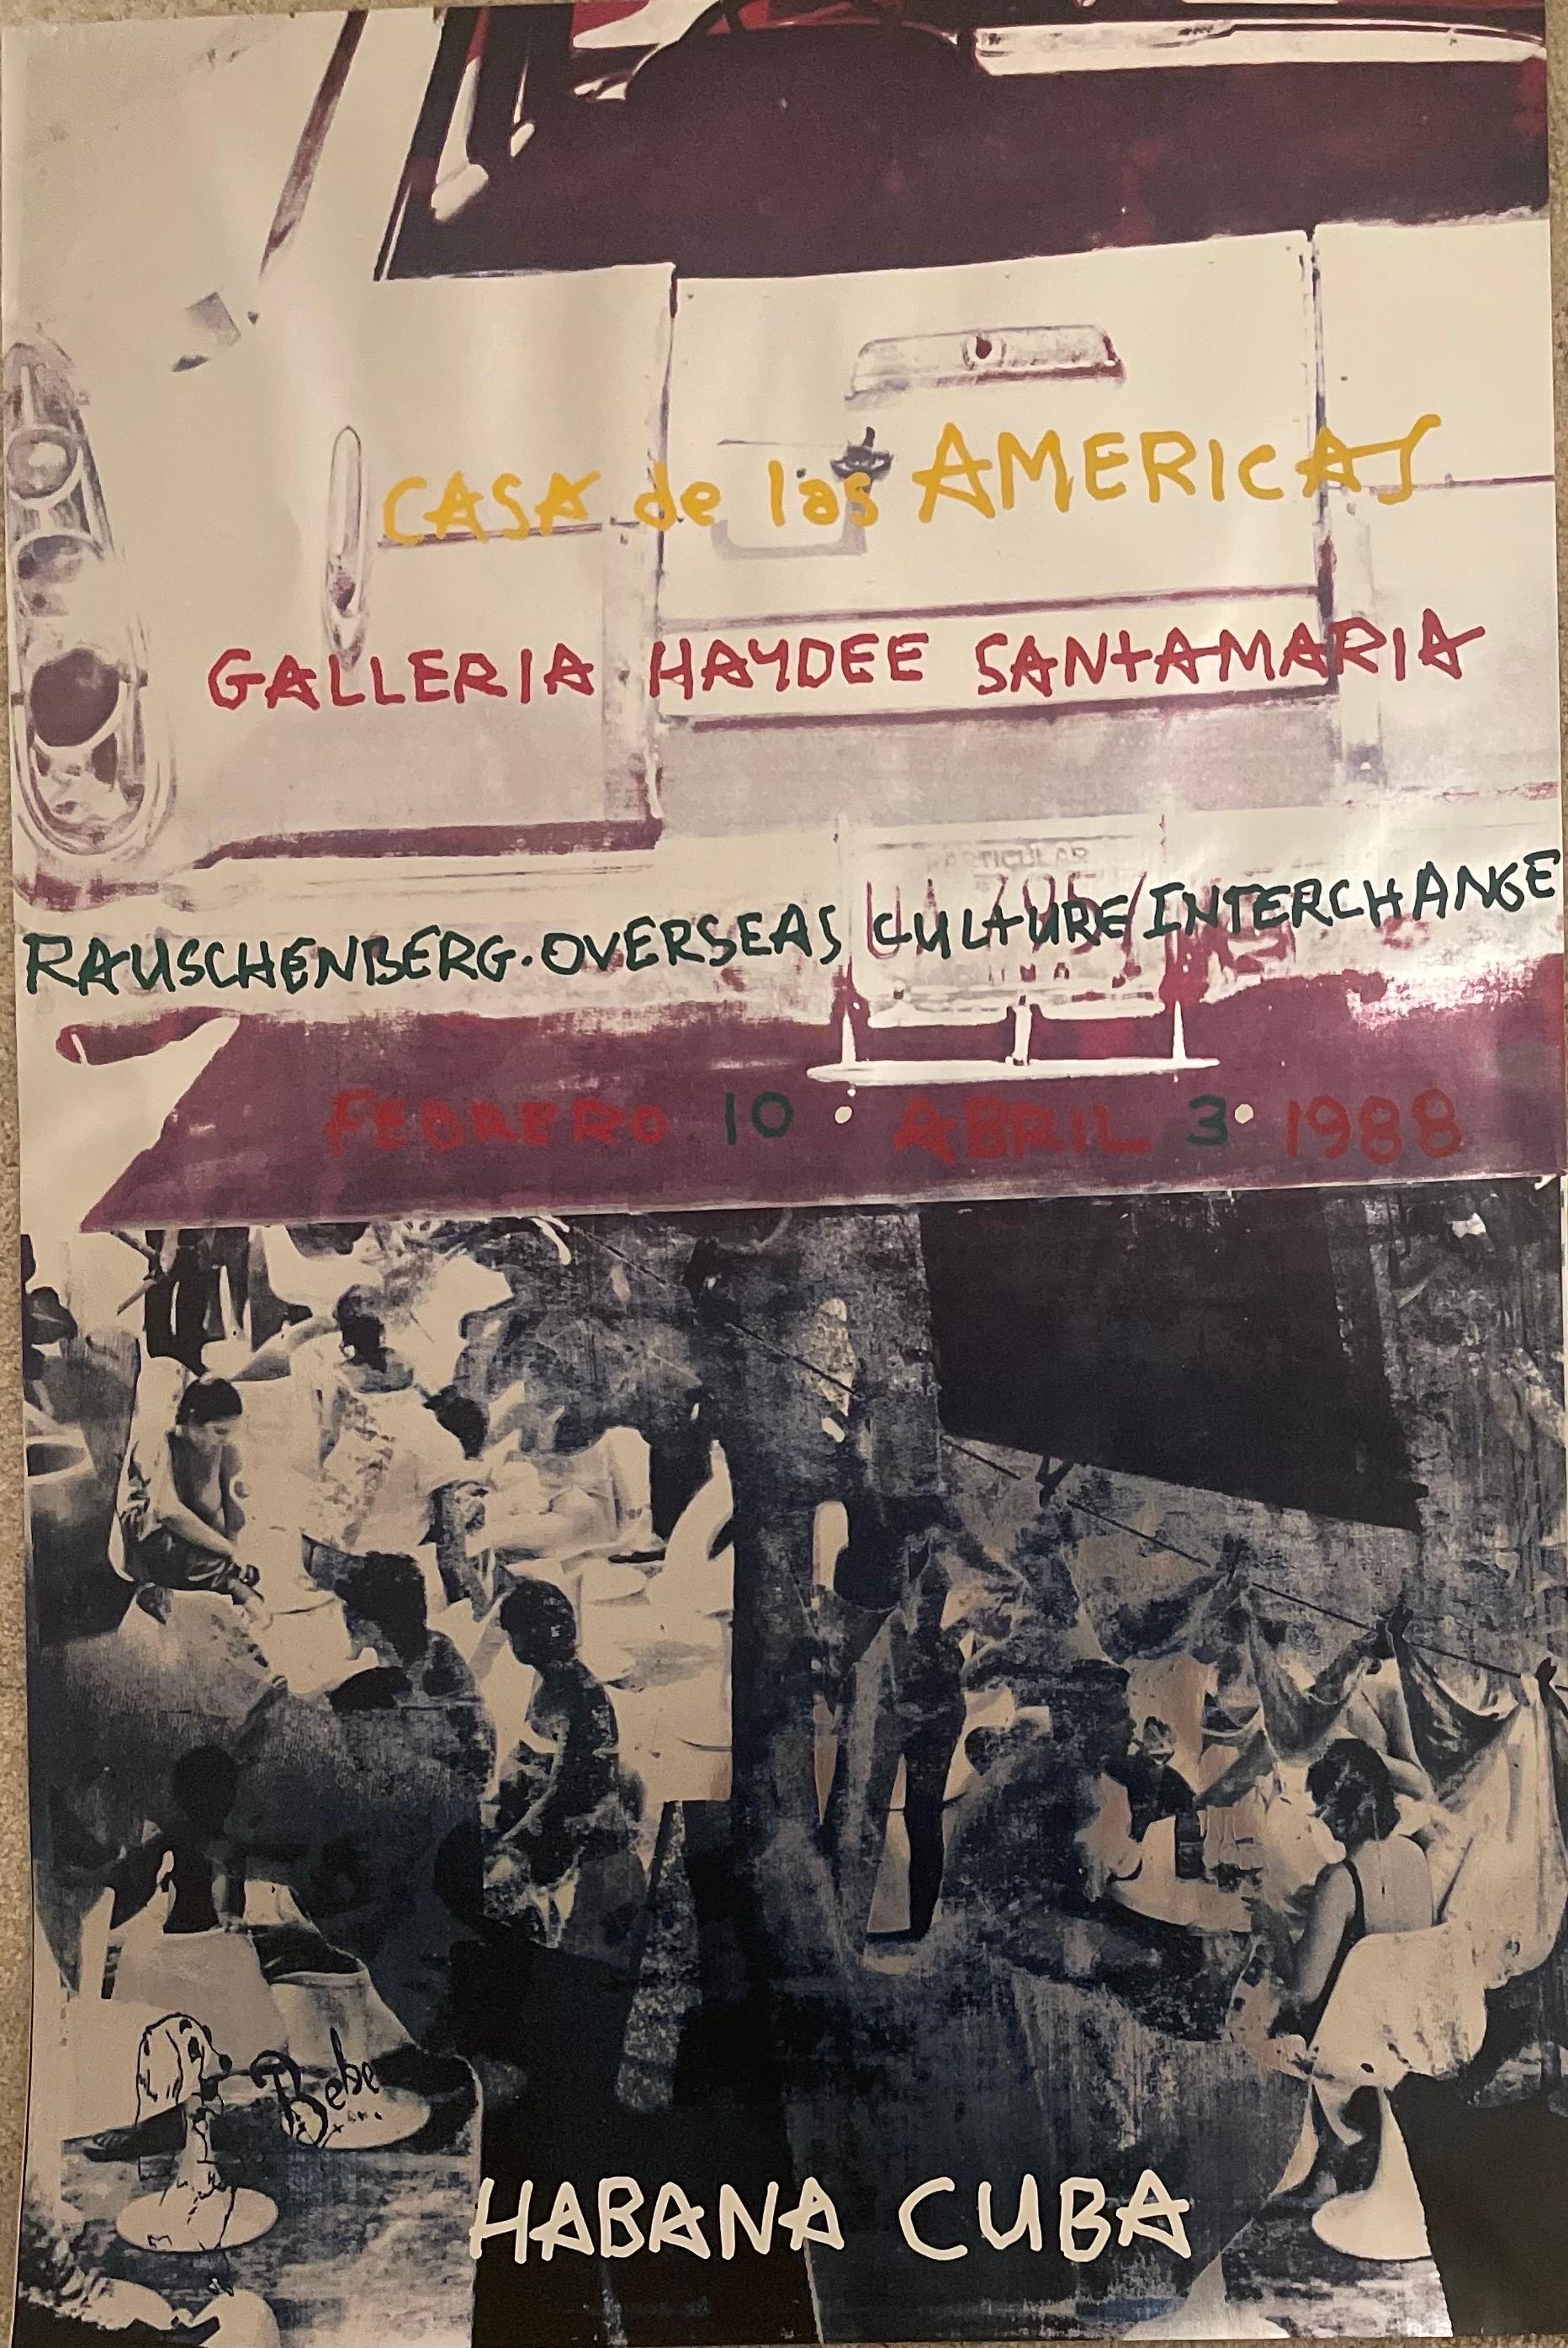 Vintage poster for Roci Cuba, Casa de las Americas by Robert Rauschenberg, circa 1988. The piece is an offset lithograph and screen print on foil-coated paper and measures 35